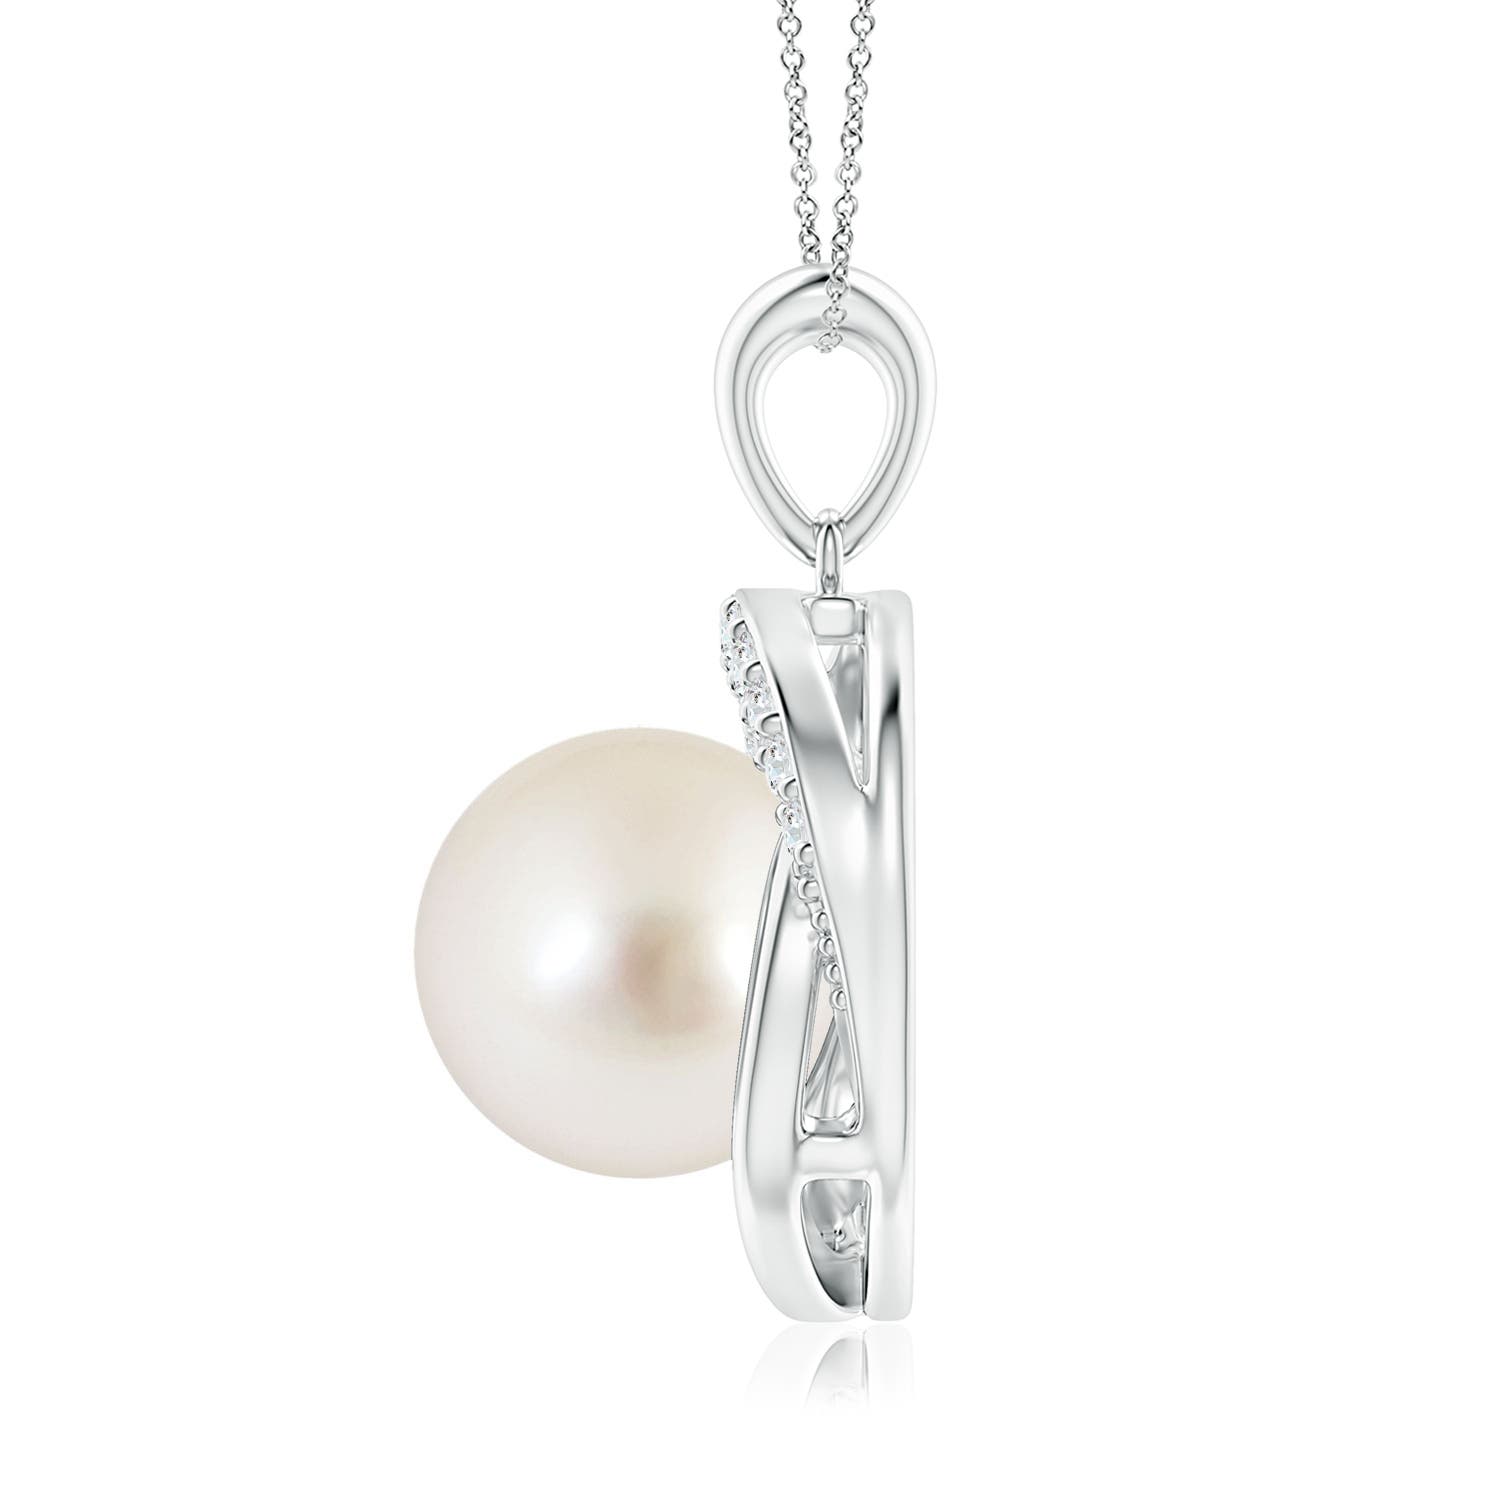 AAAA - South Sea Cultured Pearl / 7.33 CT / 14 KT White Gold